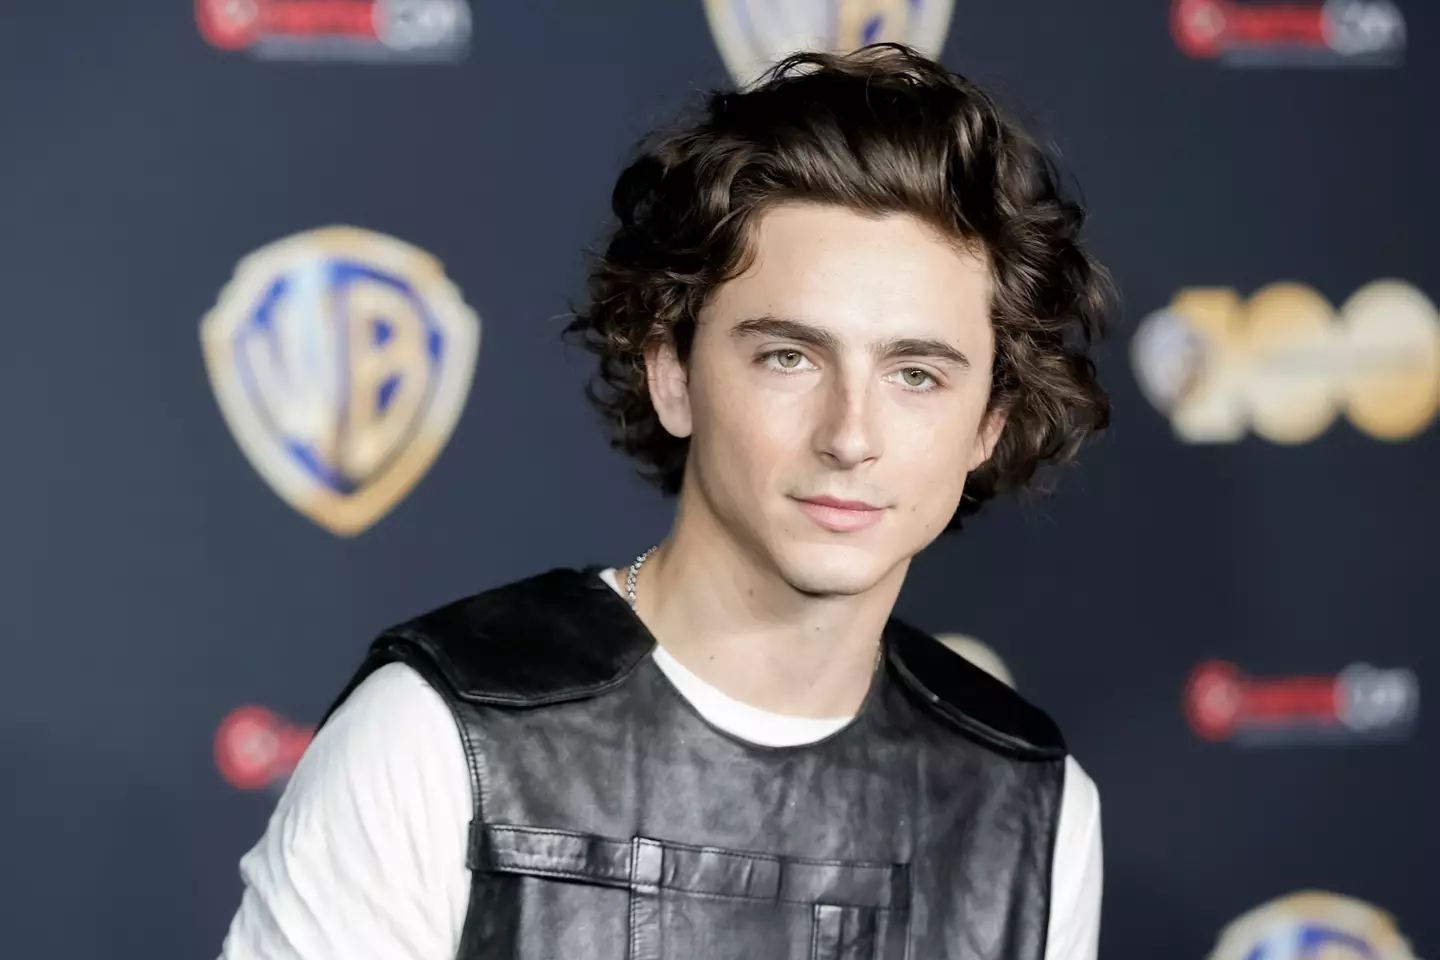 Timothee Chalamet has been dissed for his alleged relationship.